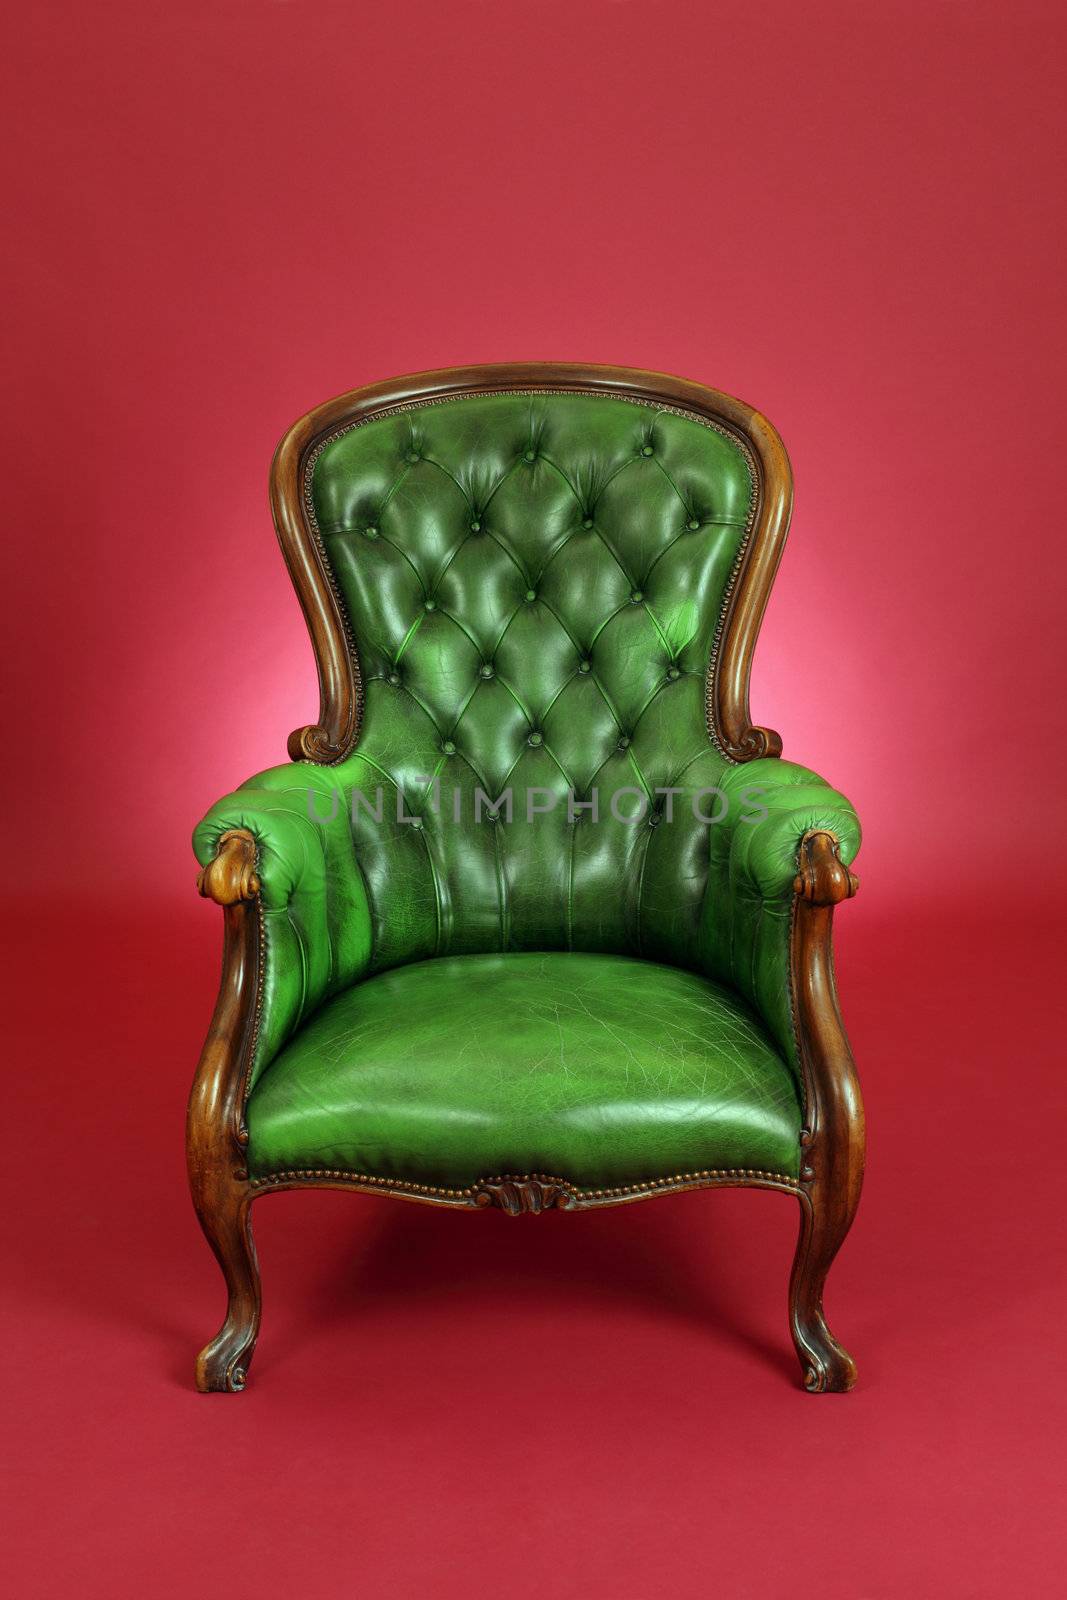 Green leather chair by sumners